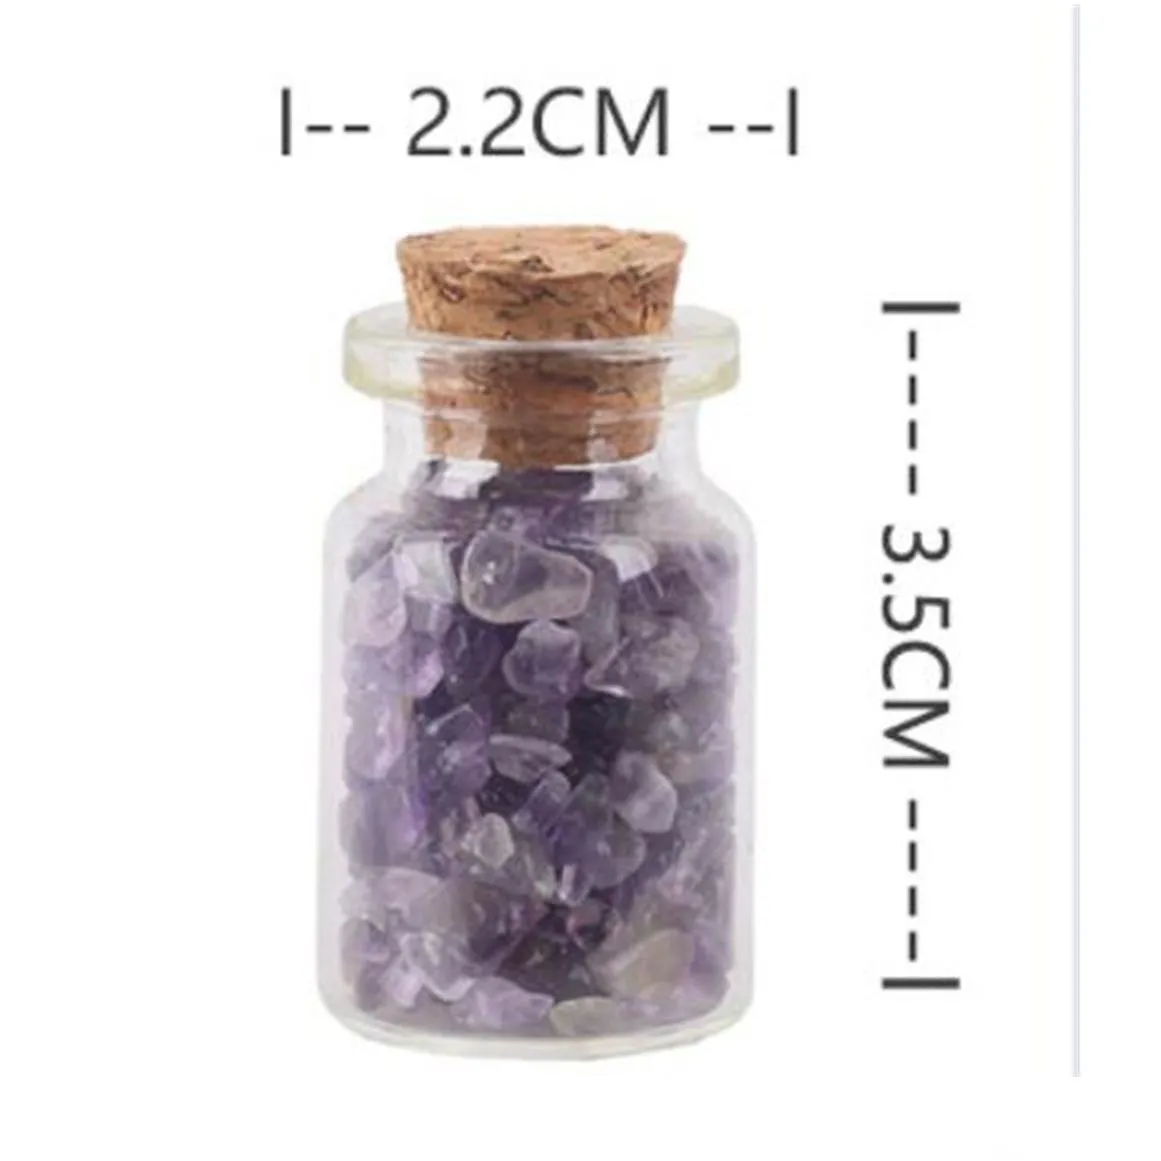 wholesale party favor gemstone chips - tumbled healing crystals for witchcraft - these mini crystal spell jars are great beginners kd